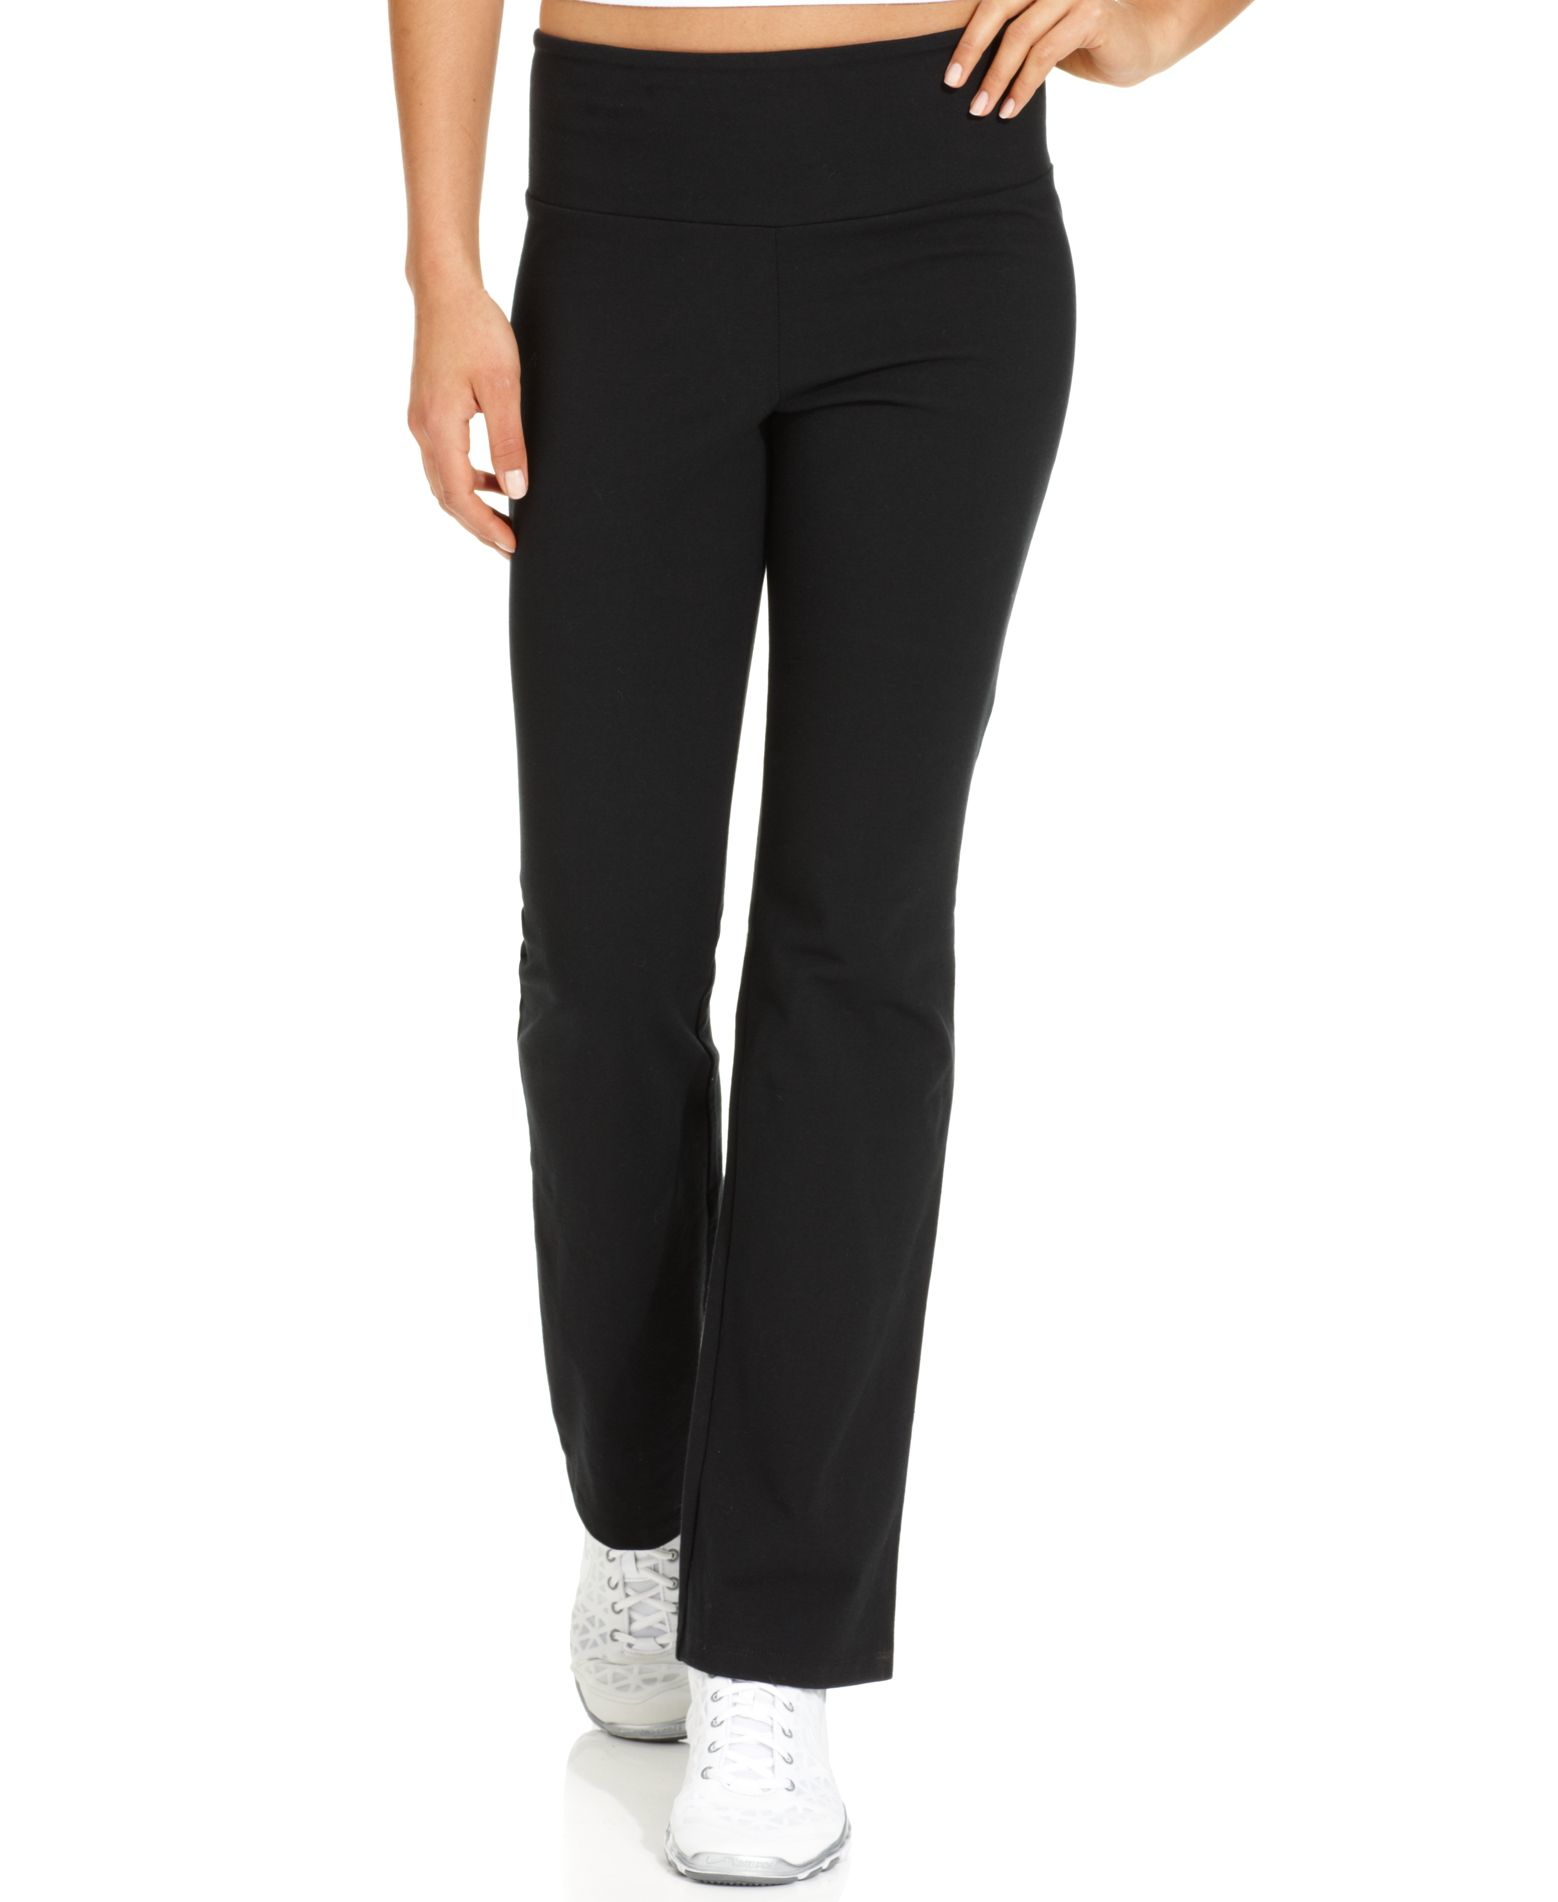 Style & co. Tummy-control Bootcut Pull-on Pants in Black | Lyst